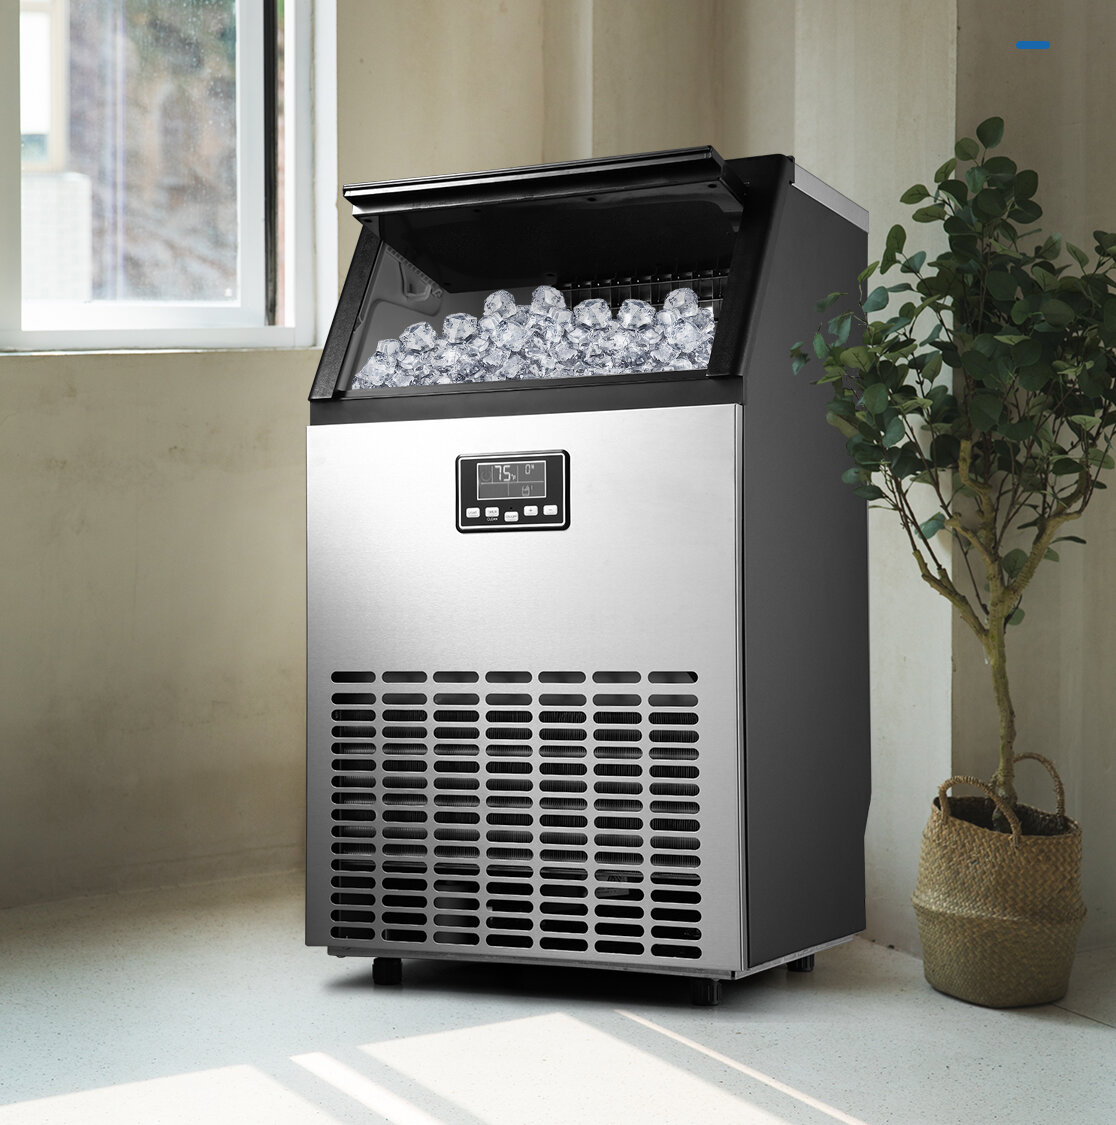 Ice cube maker with lid »Crystal« - Westmark Shop